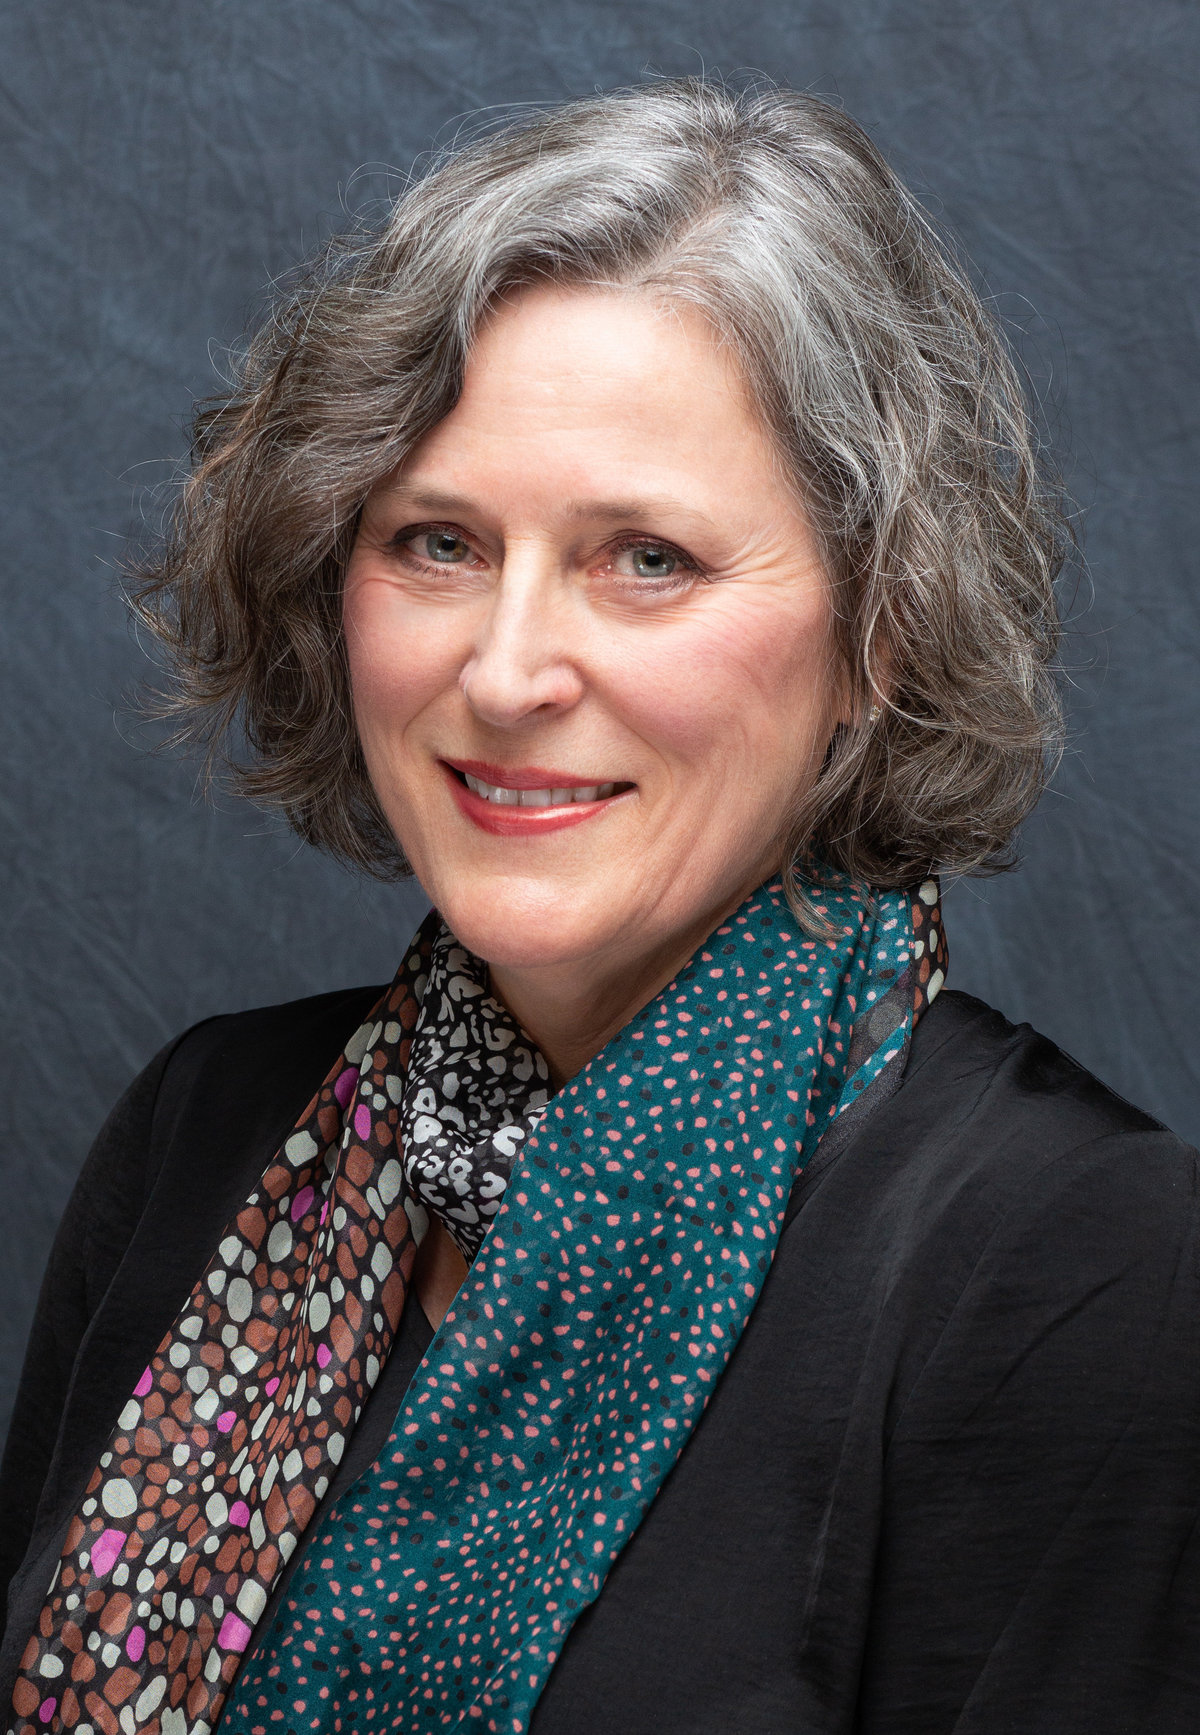 Elegant headshot portrait of a mature woman with silver hair, adorned in a multi-patterned scarf, set against a subtle gray background.